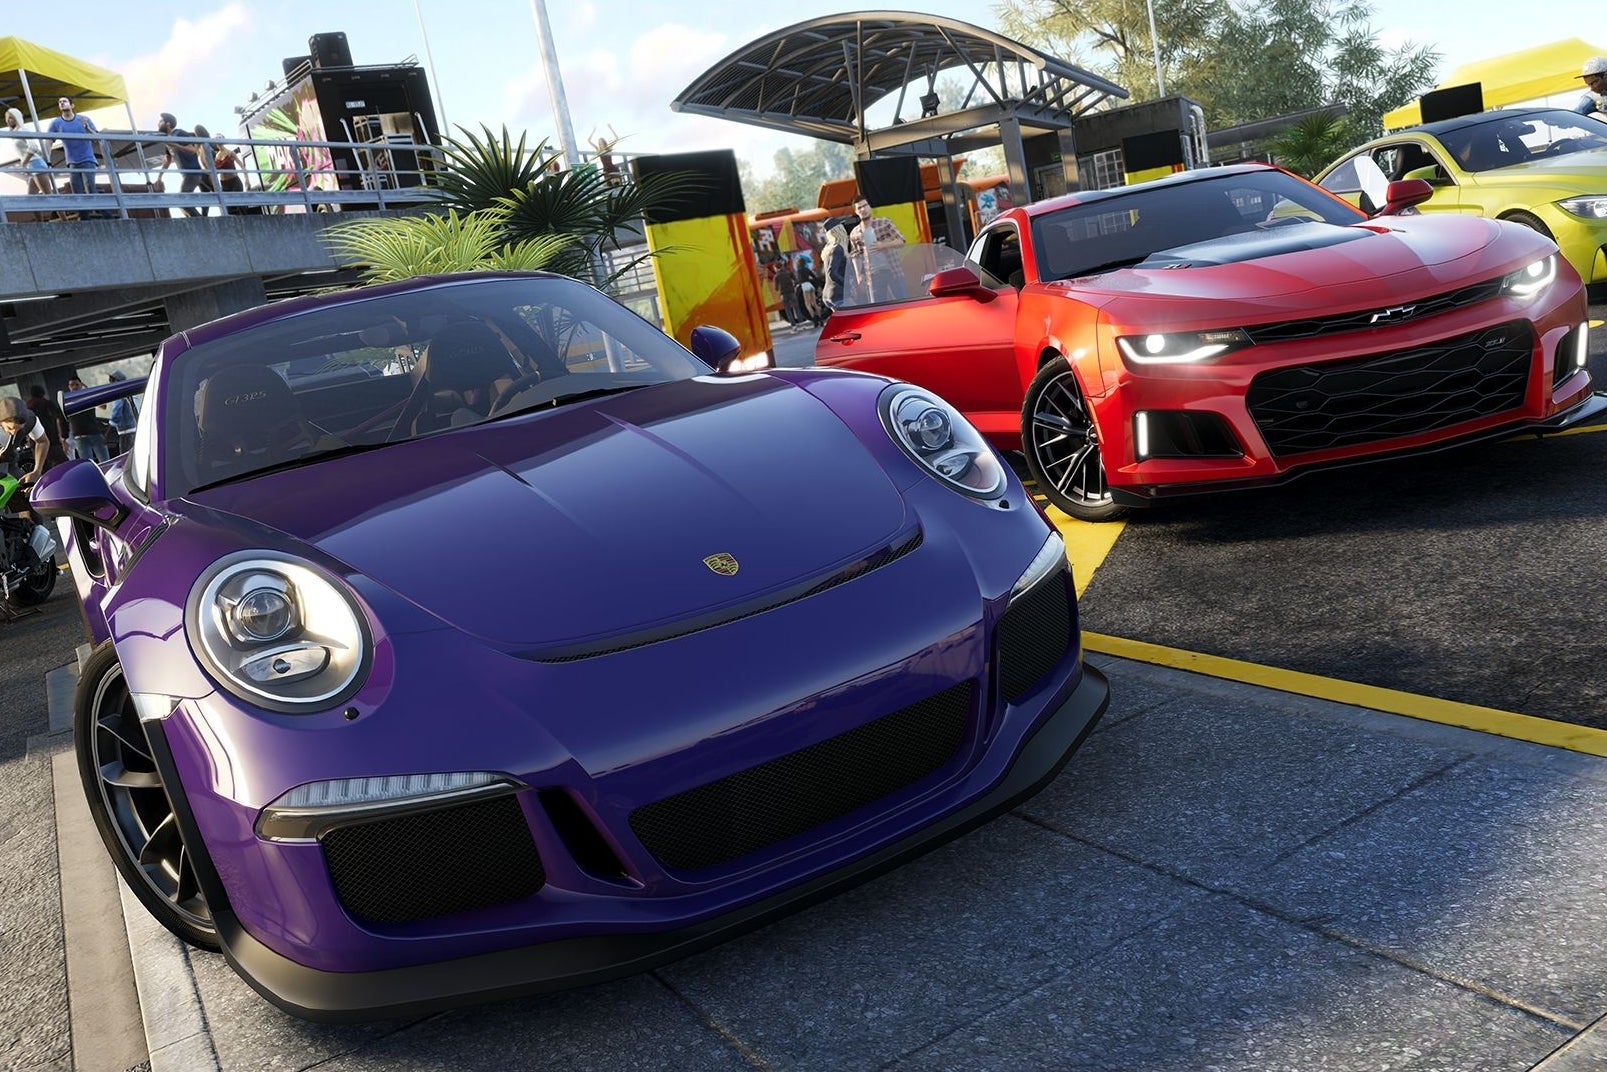 Image for The Crew 2 is finally out in June